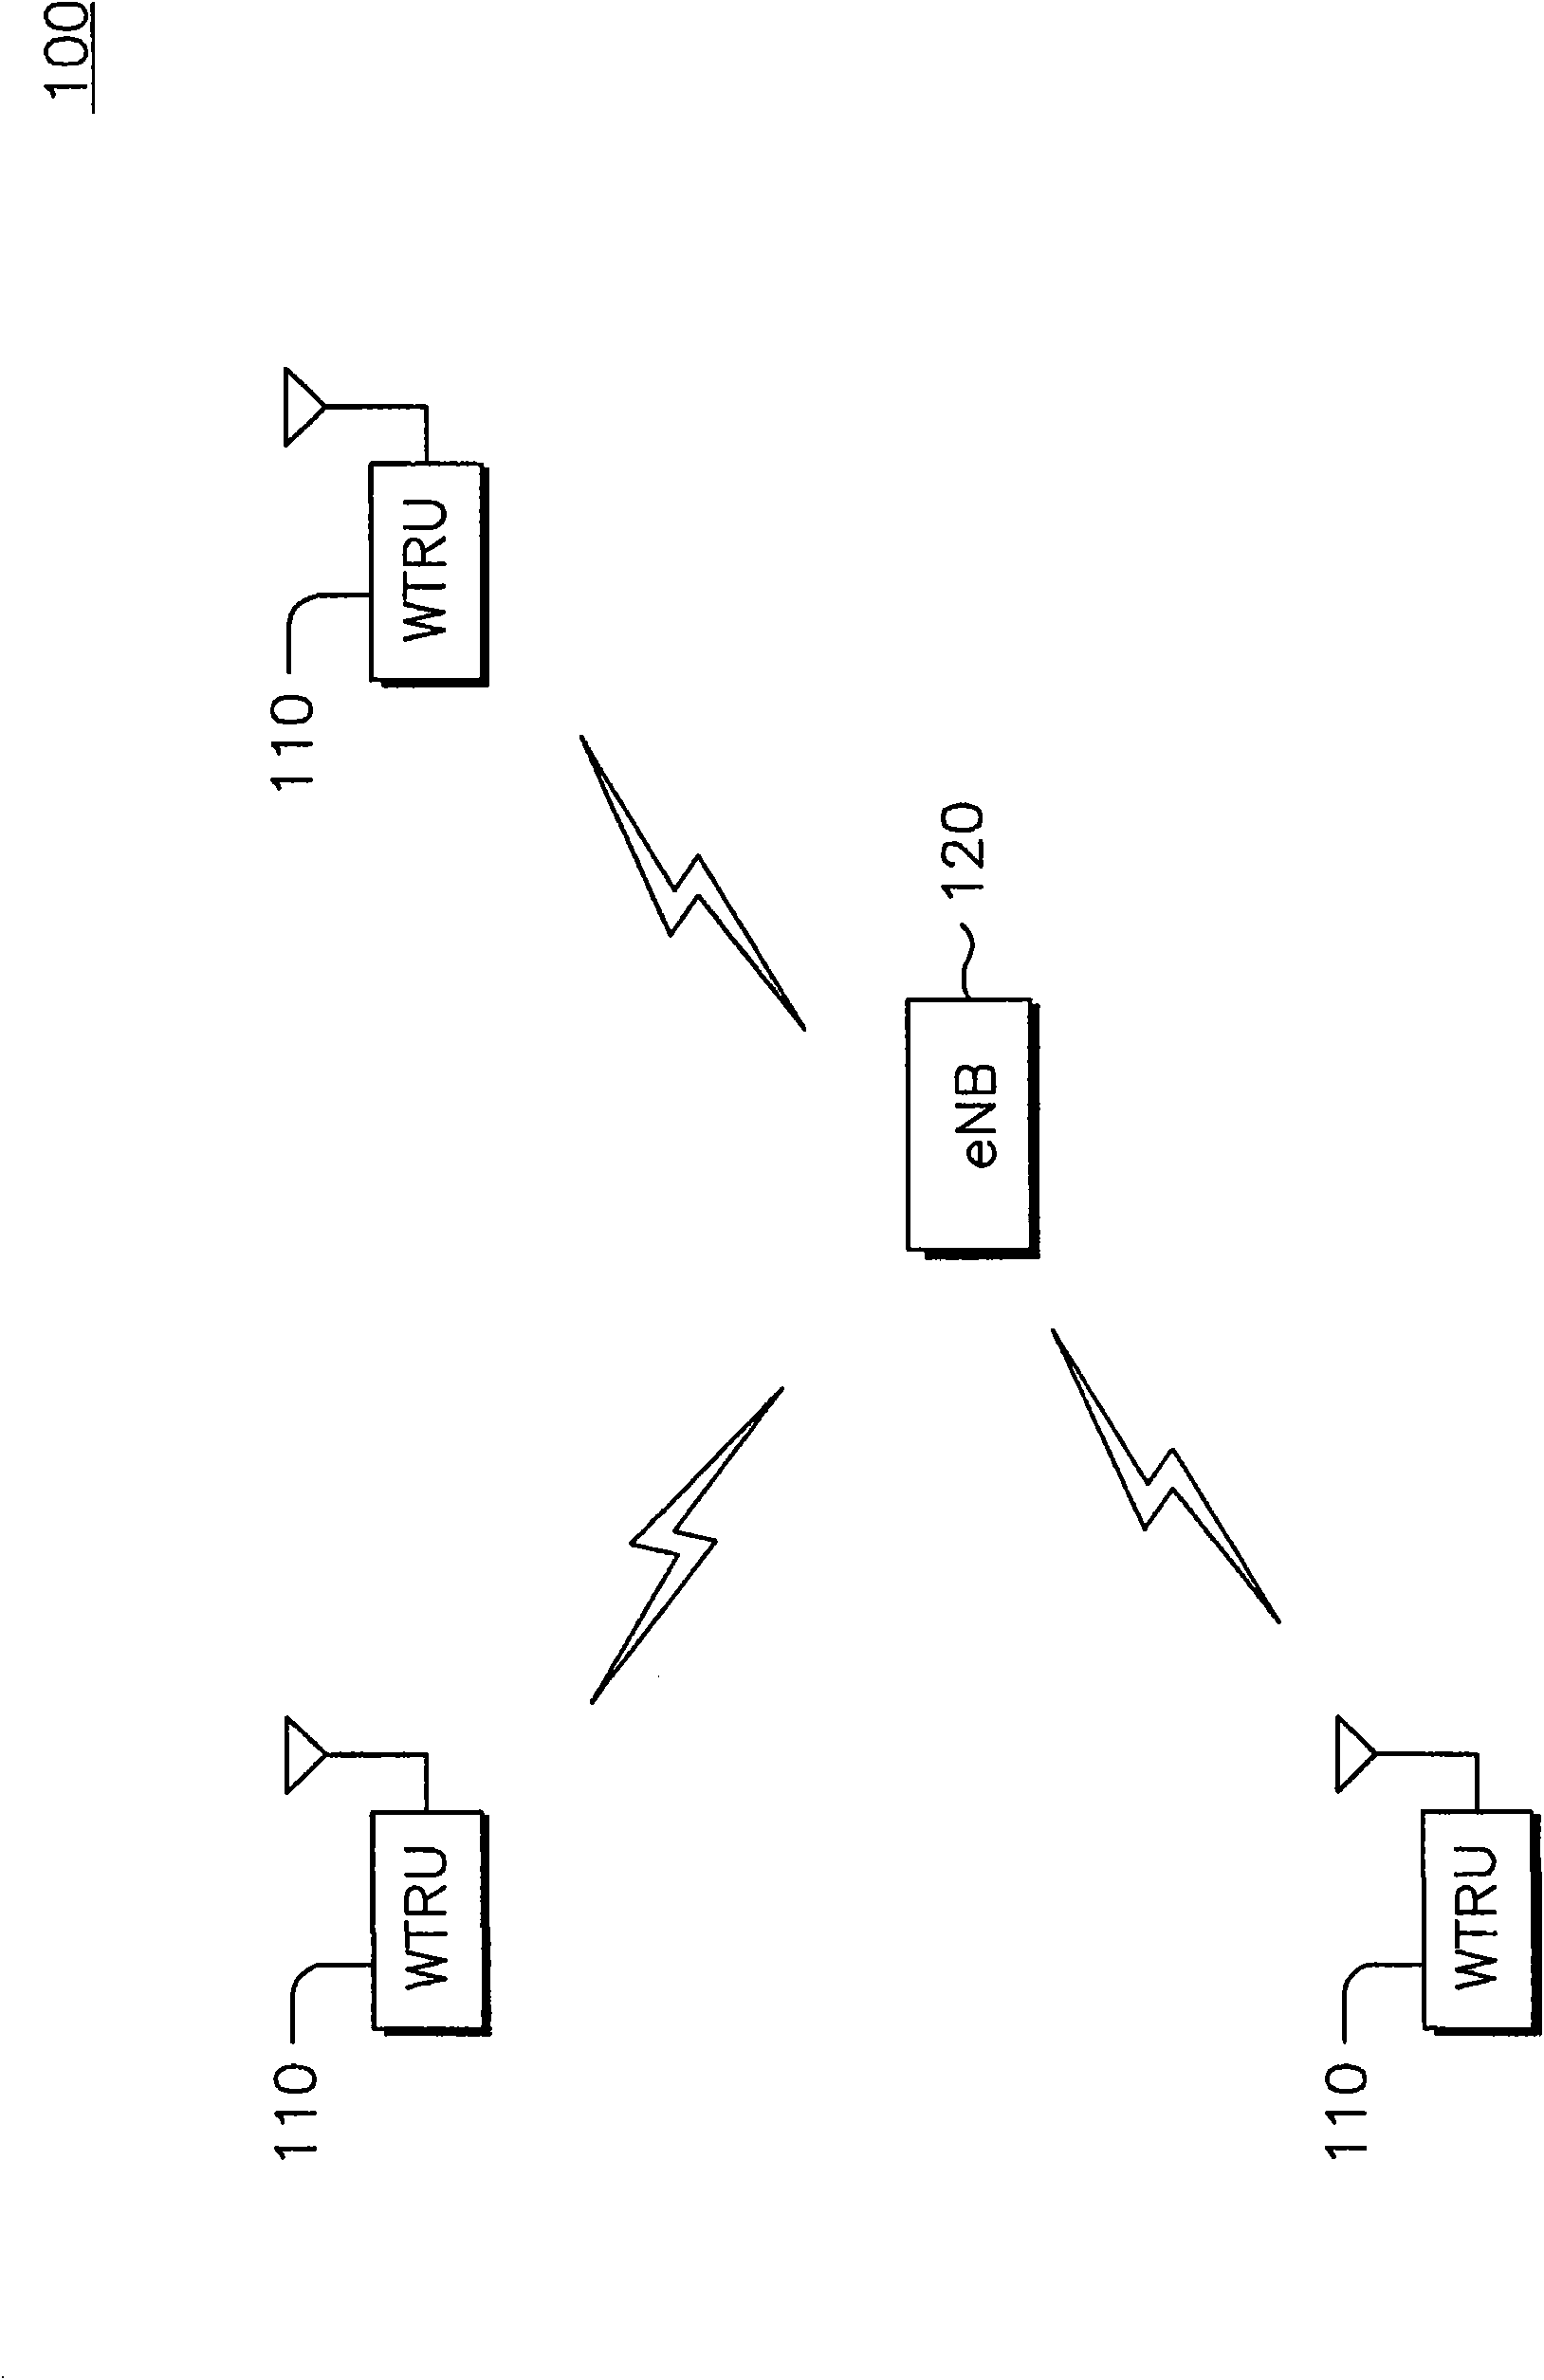 Implicit DRX cycle length adjustment control in LTE_active mode